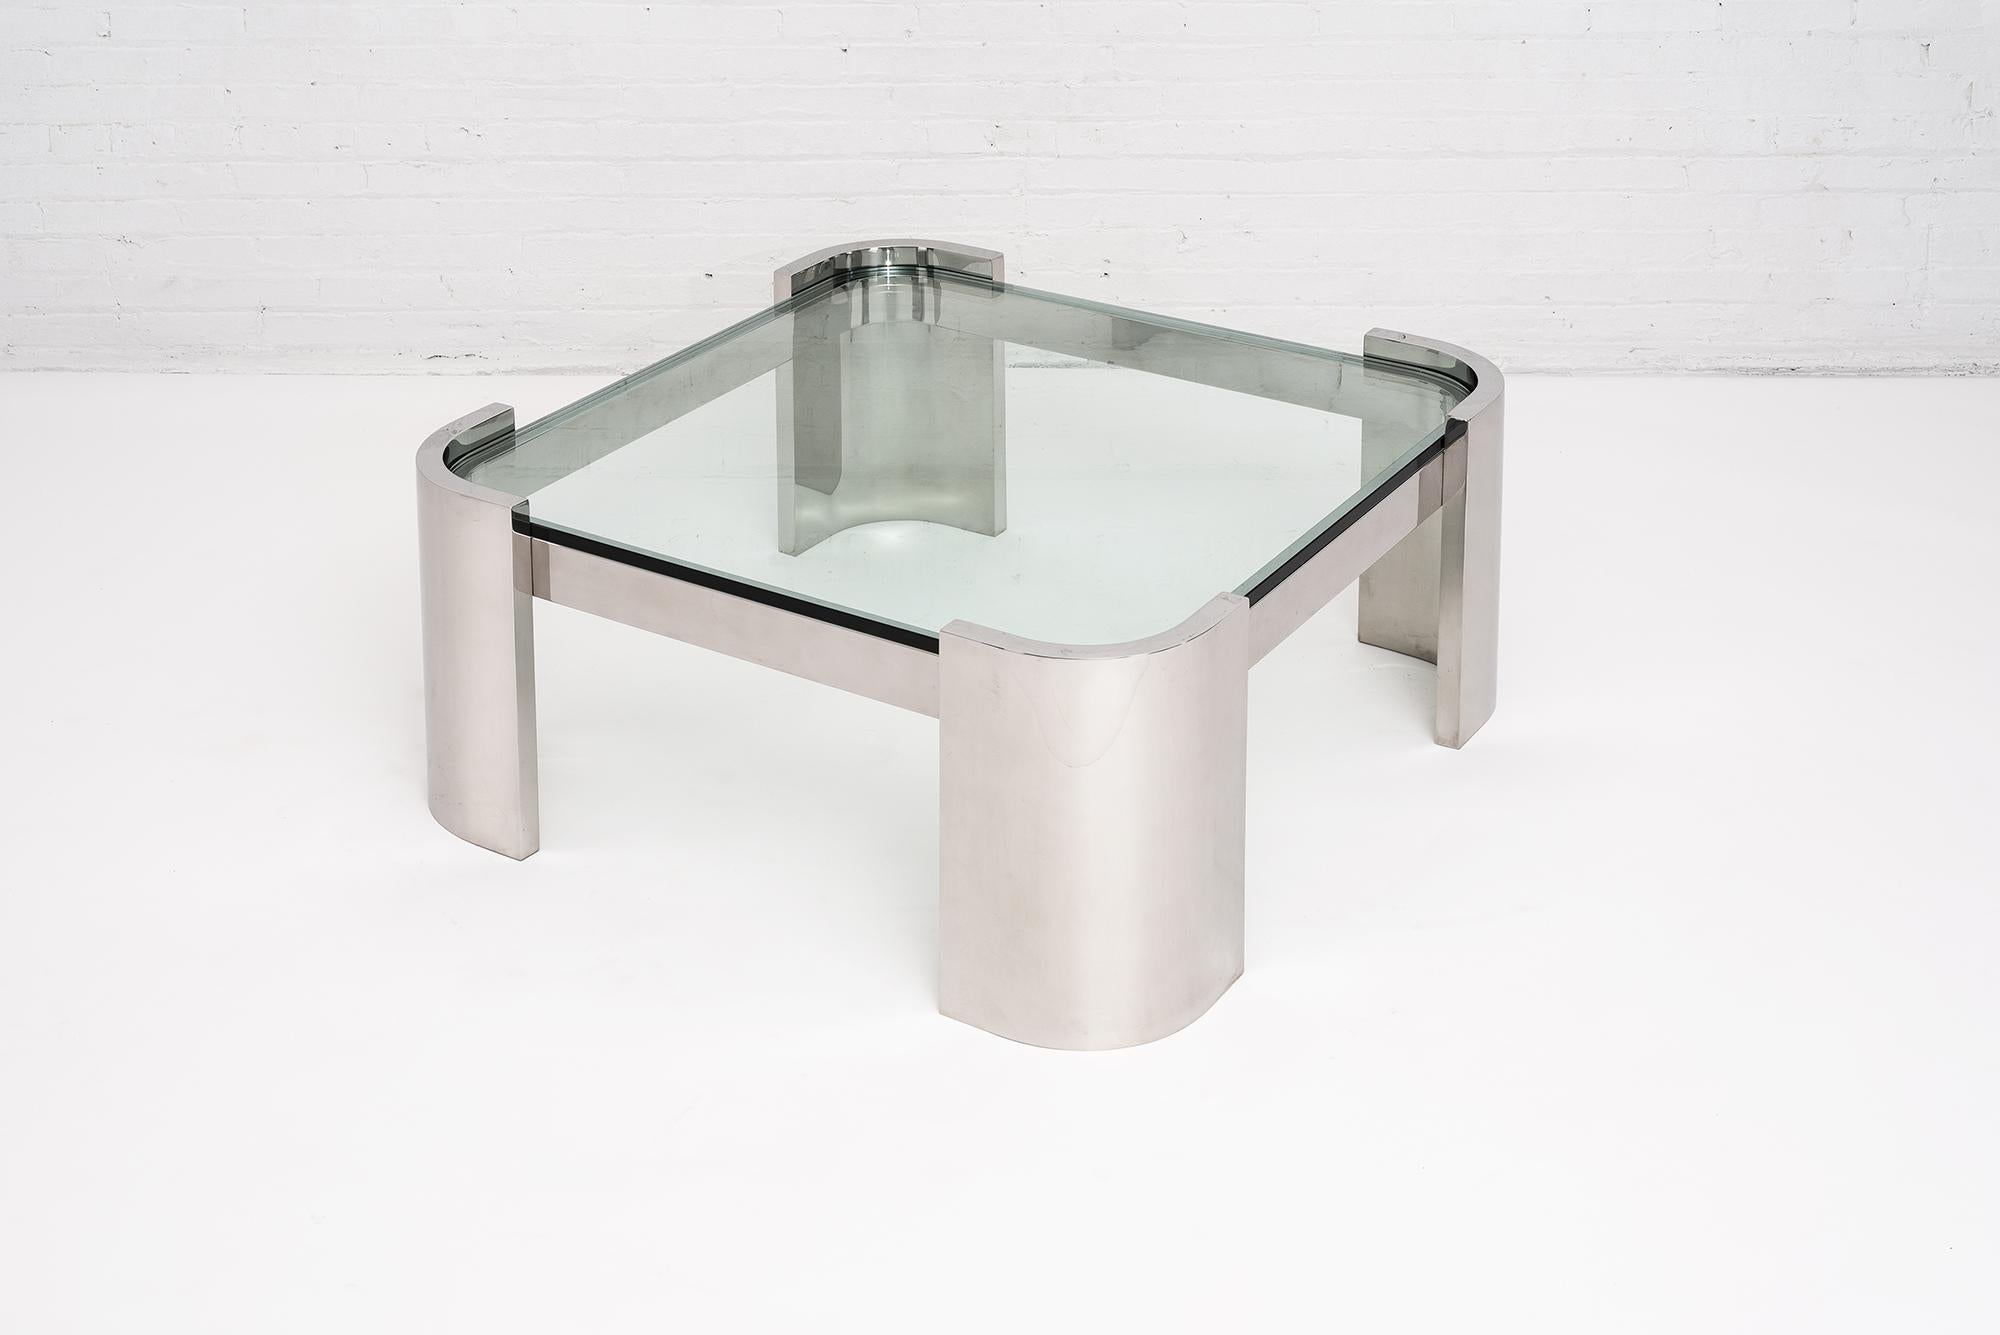 Brueton polished stainless steel and glass top coffee table, circa 1970. Stainless steel with 3/4” glass top. Heavy stainless steel construction that Brueton is known for. Polished chrome finish.